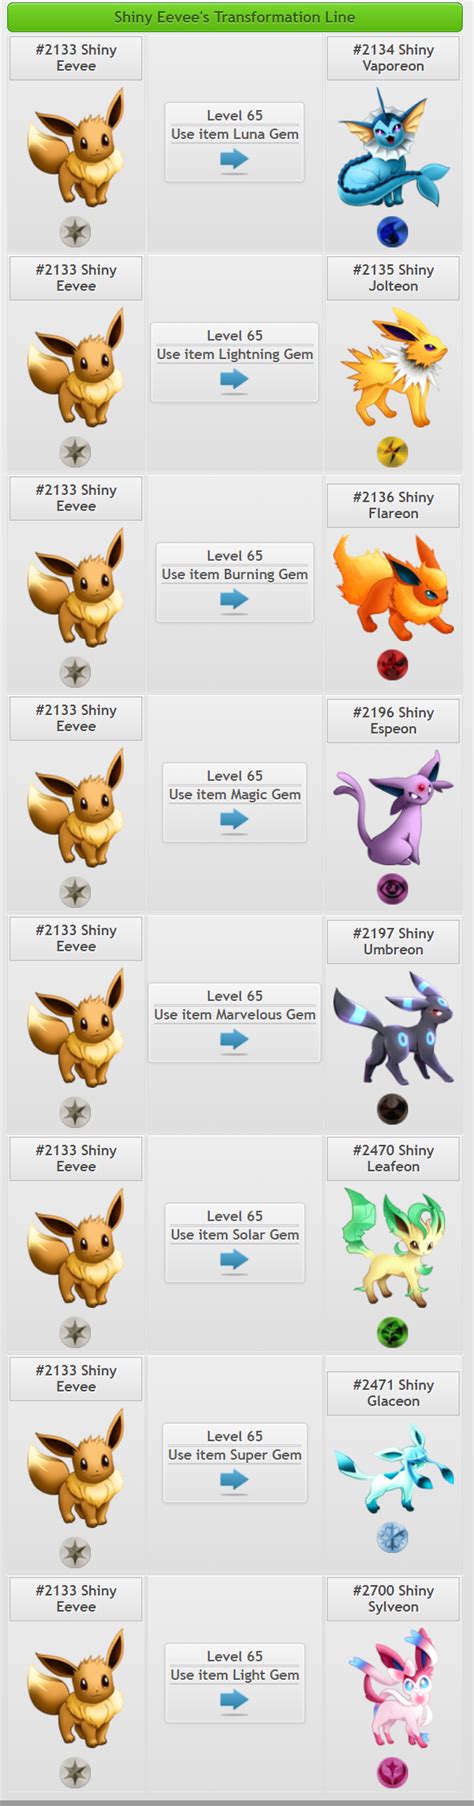 How to evolve eevee using nicknames. What is your favourite shiny Eevee evolution? - Quora